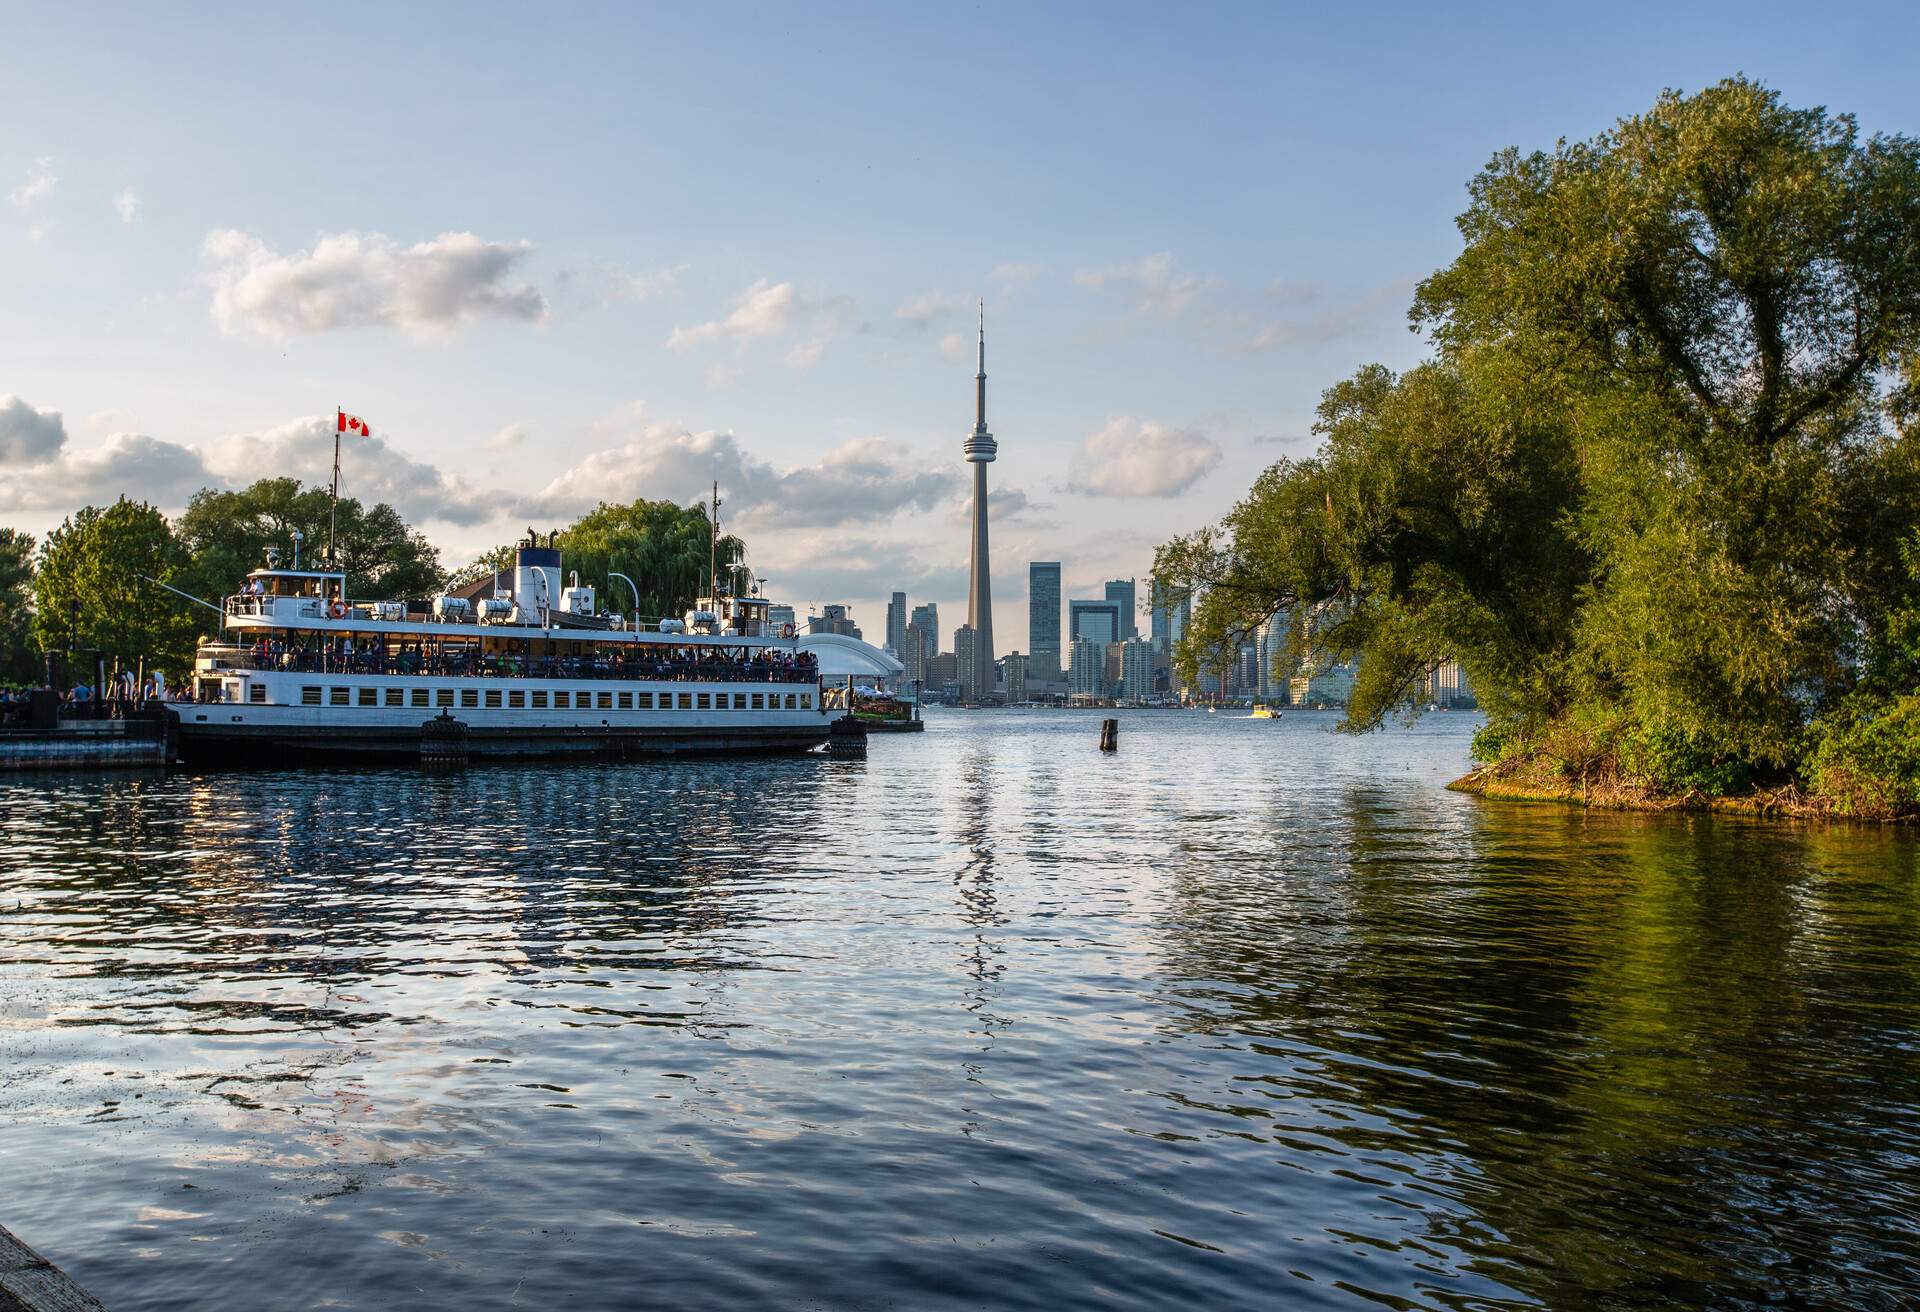 The Toronto city skyline at dusk as seen from the viewpoint of the Toronto Islands.  A municipal ferry shuttles passengers from the Toronto Islands to the mainland.